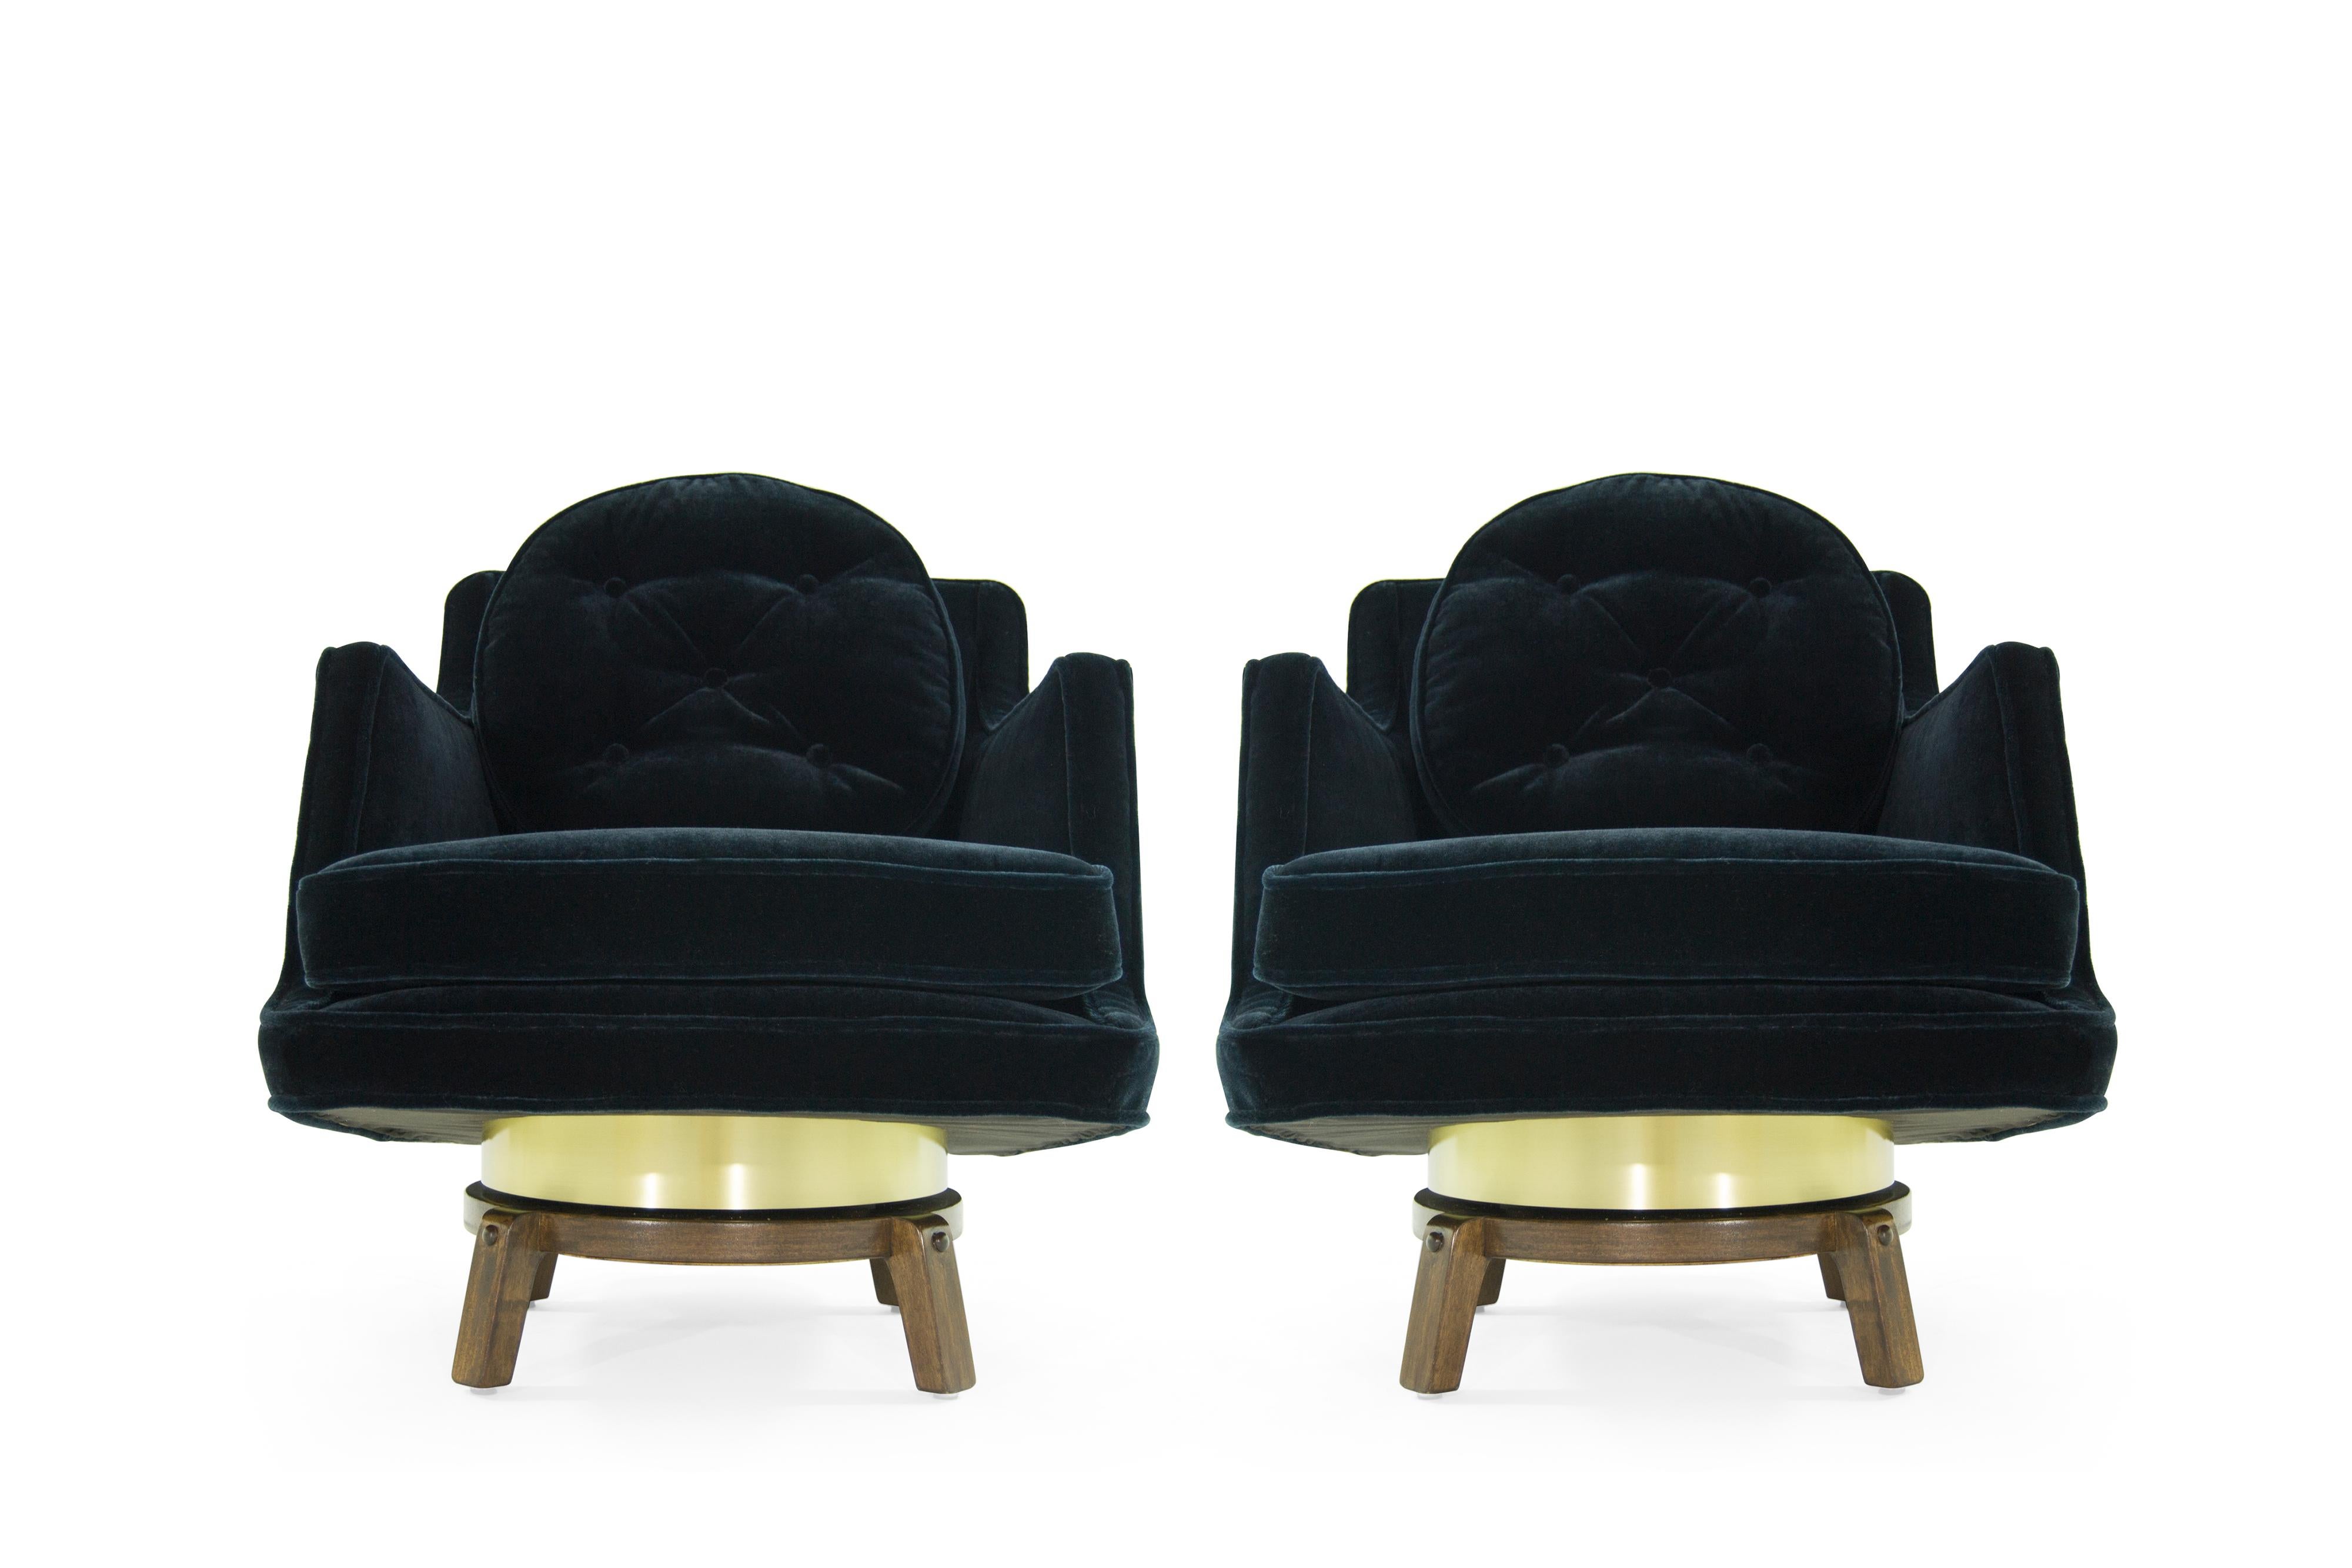 Brass Accented Swivel Chairs by Edward Wormley for Dunbar, 1950s 1